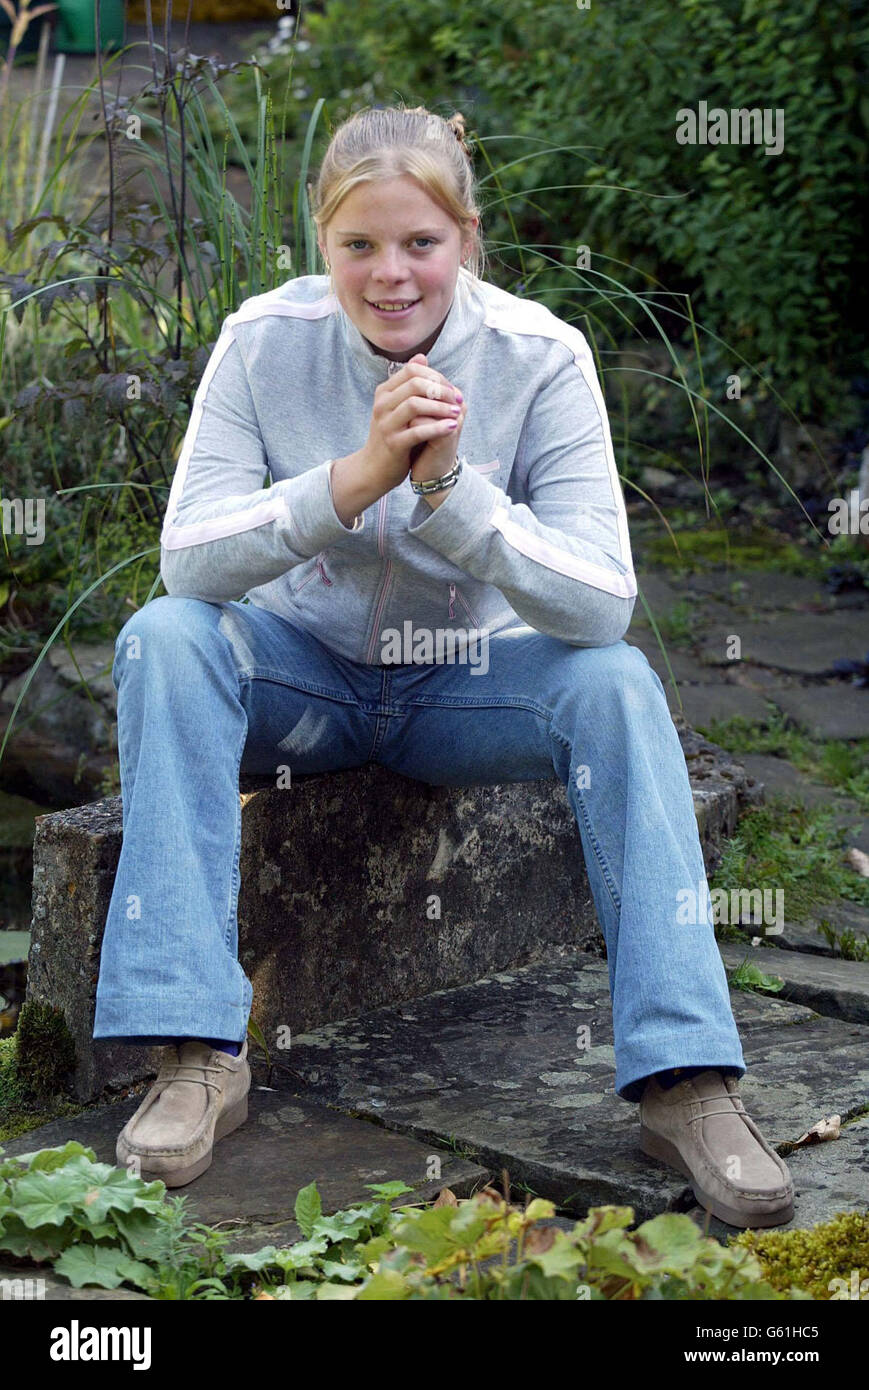 Recent picture issued Saturday September 21, 2002 of Gemma Dowler - sister of Milly - in Walton on Thames. Milly's remains were found in woodland six months after she disappeared from Walton on Thames. Stock Photo